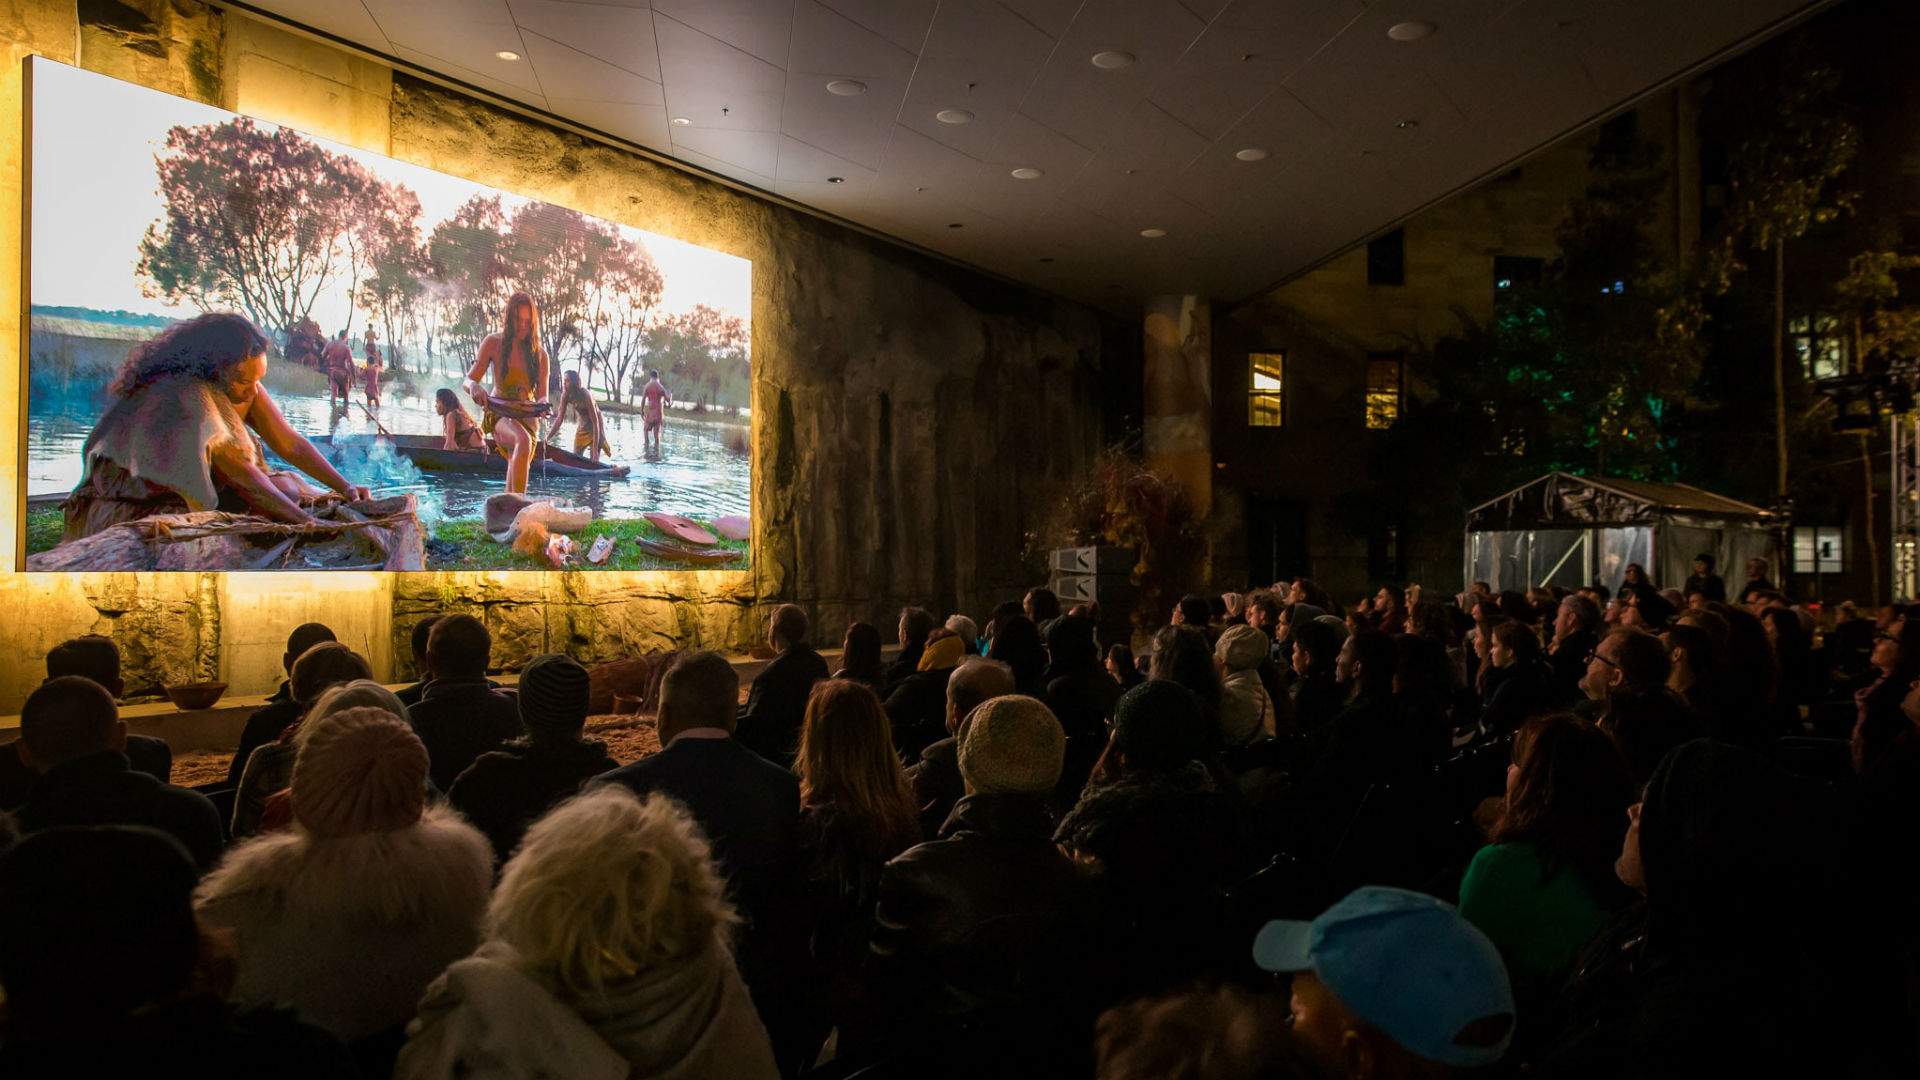 Barangaroo's New Large-Scale Video Installation Is a Modern Reimagining of Welcome to Country